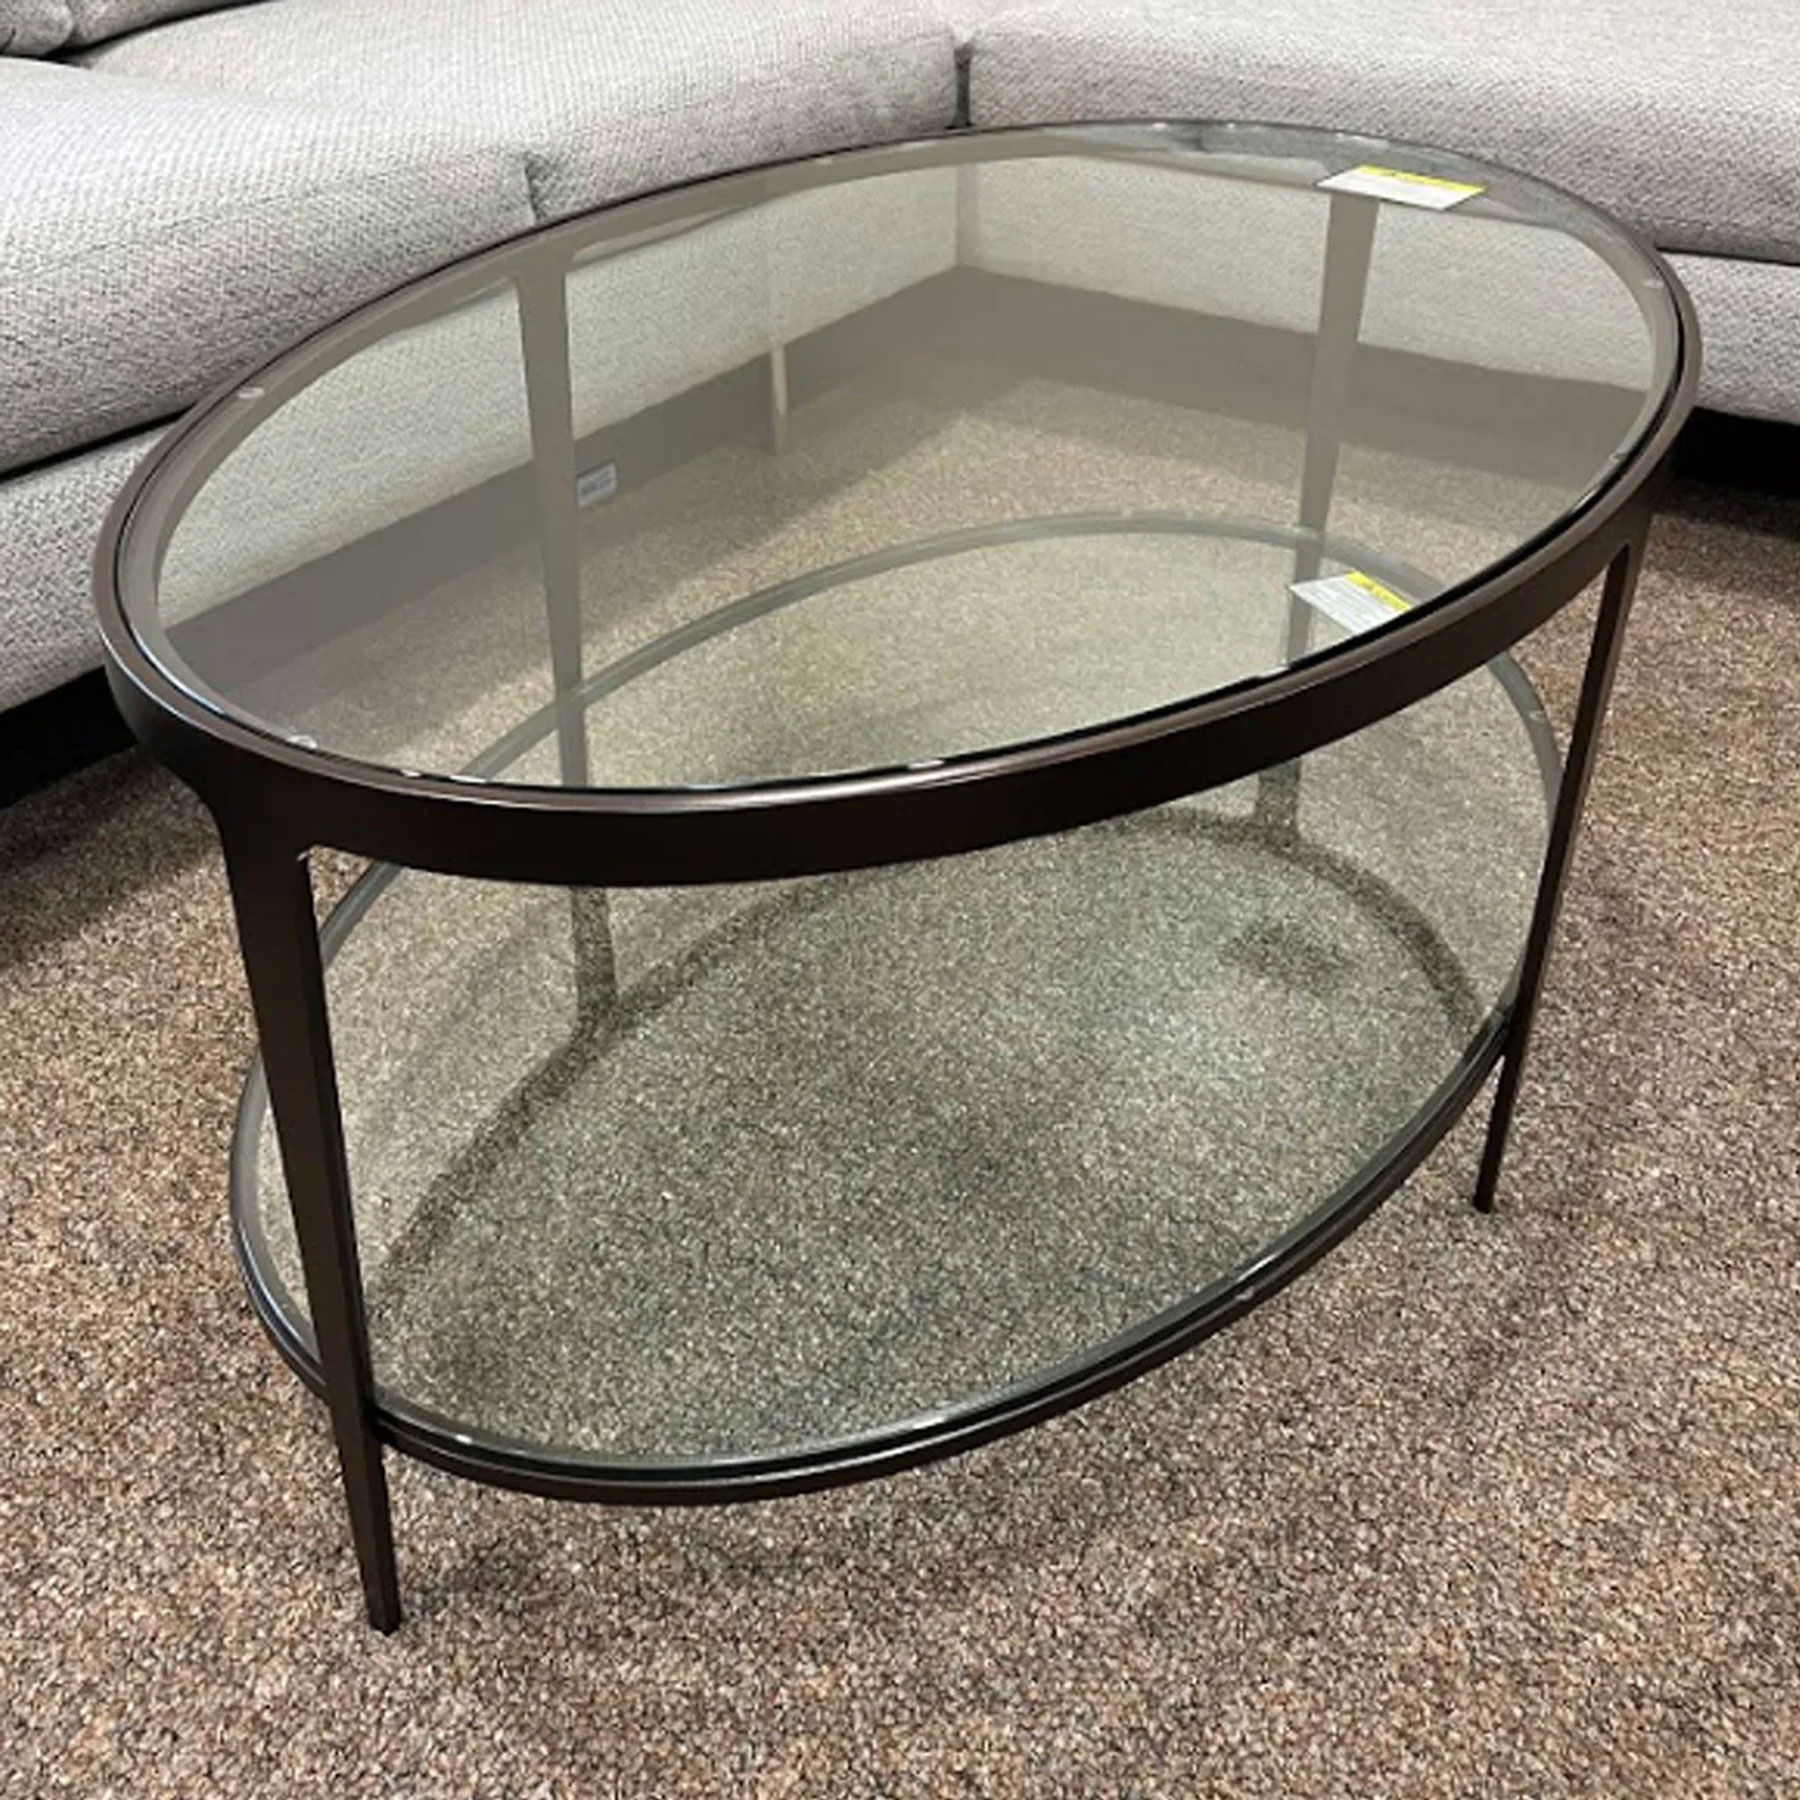 Charleston Forge Ellipse Cocktail Table in Oil Rubbed Bronze